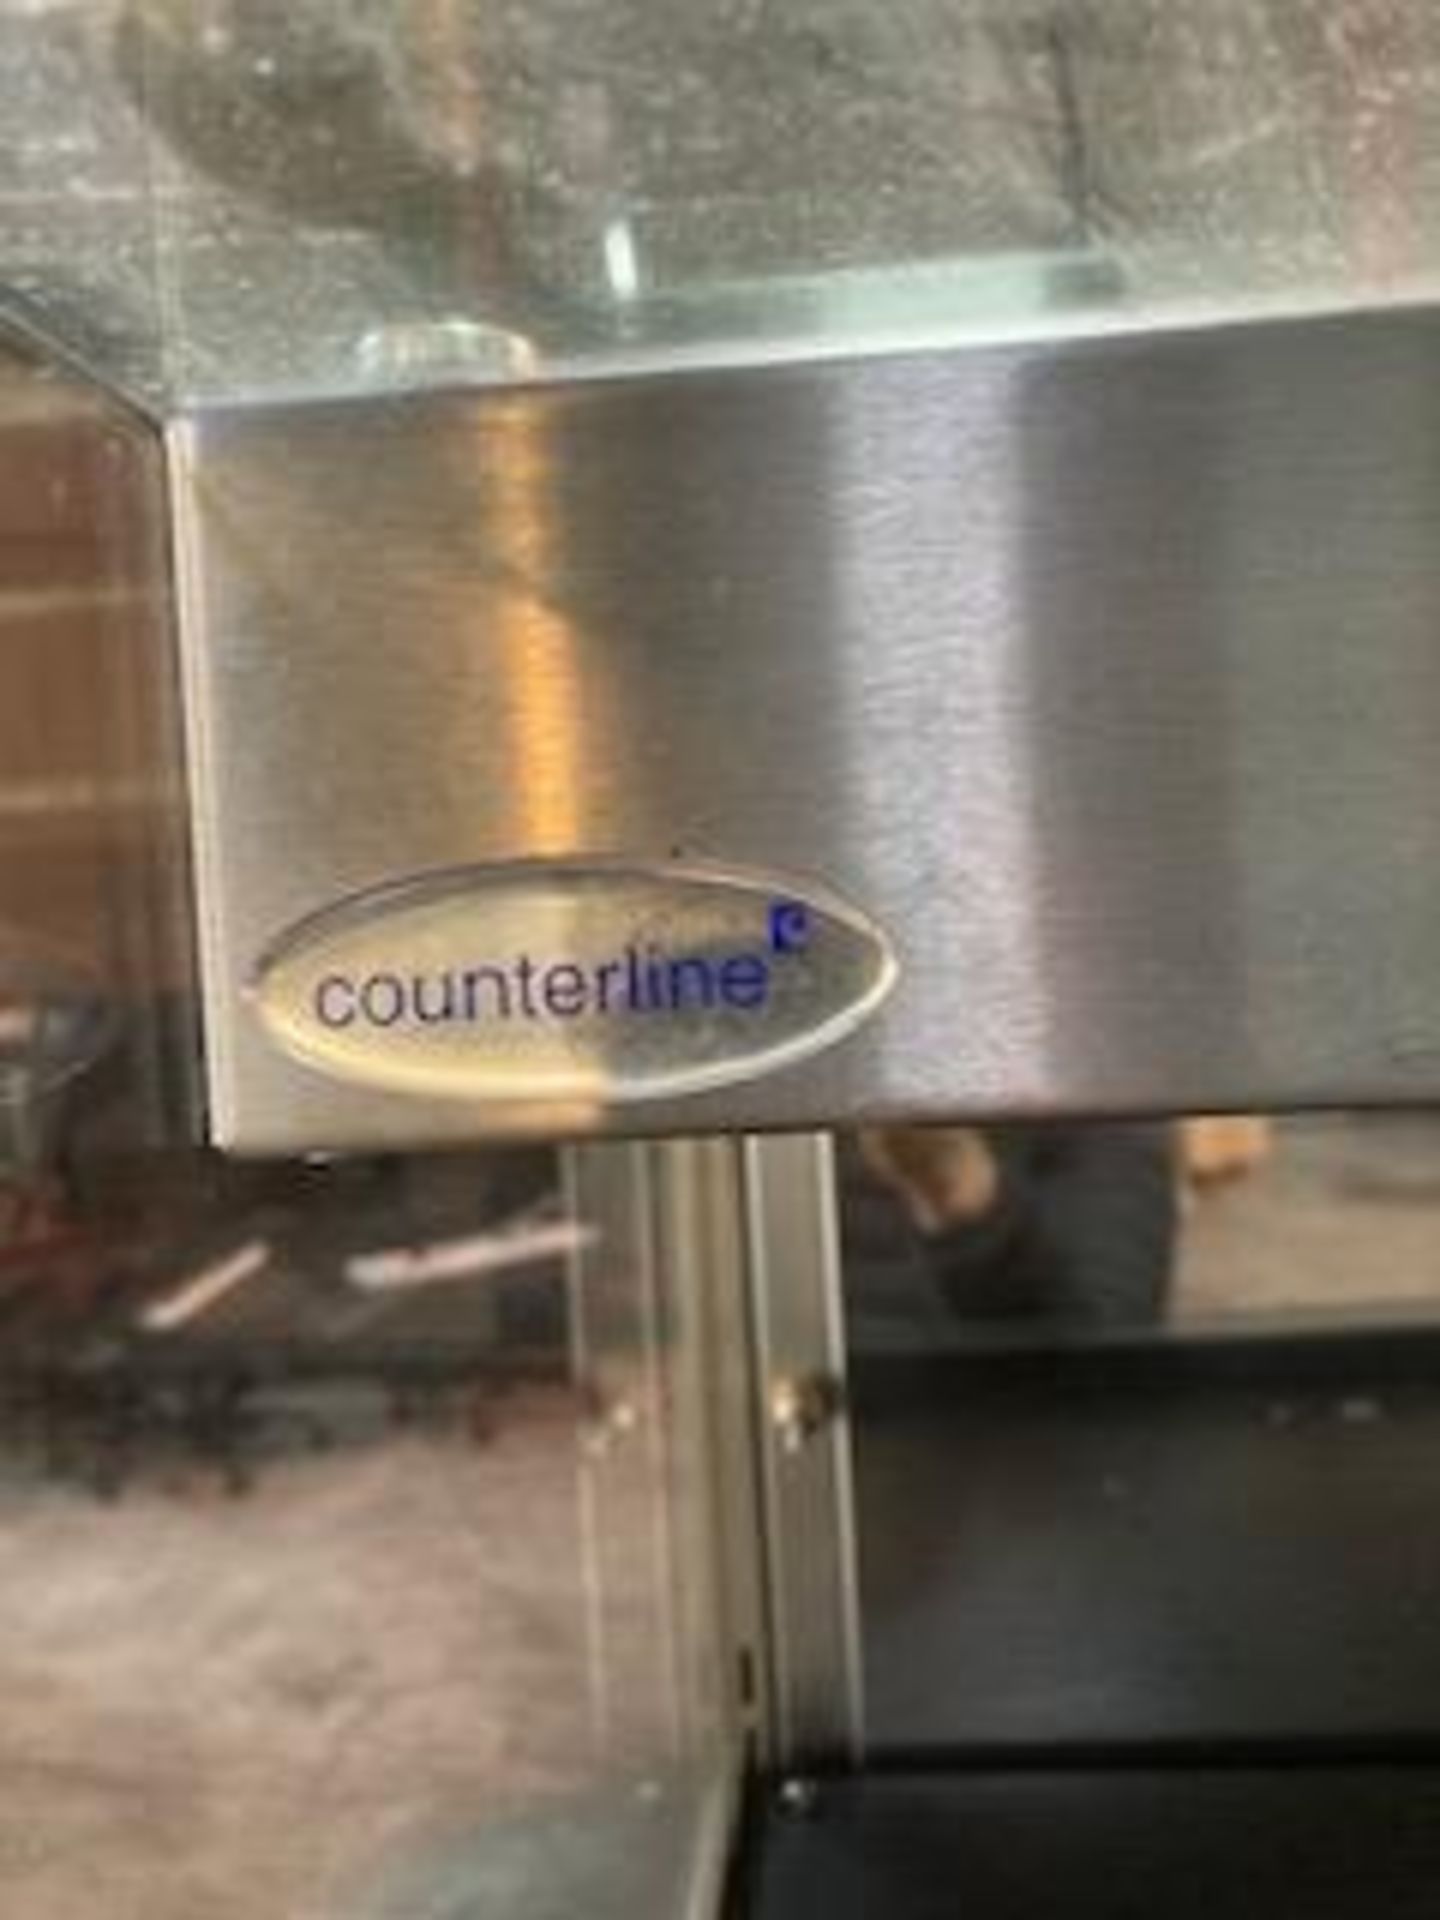 Counterline Three Deck Stainless Steel Heated Display Cabinet - Image 5 of 5